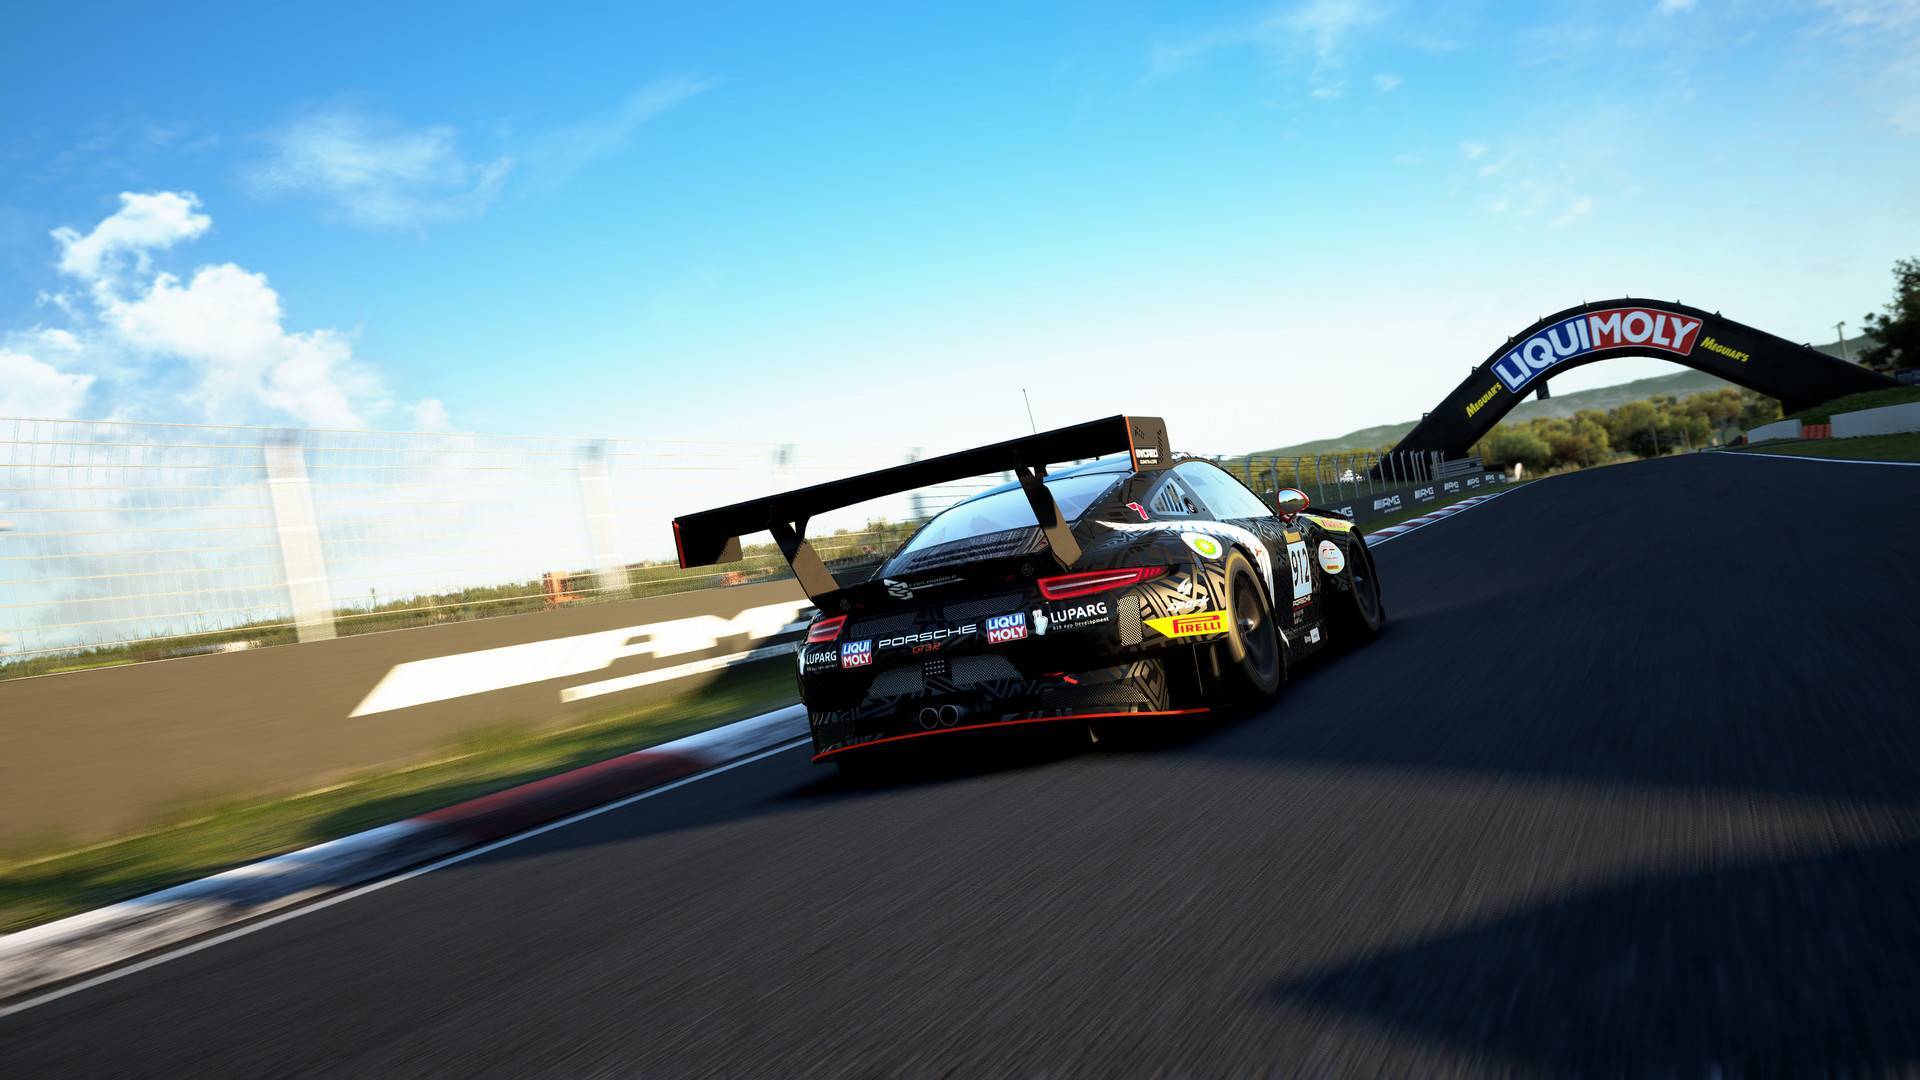 Assetto Corsa Competizione Intercontinental GT Pack (PC) Key cheap - Price  of $4.26 for Steam